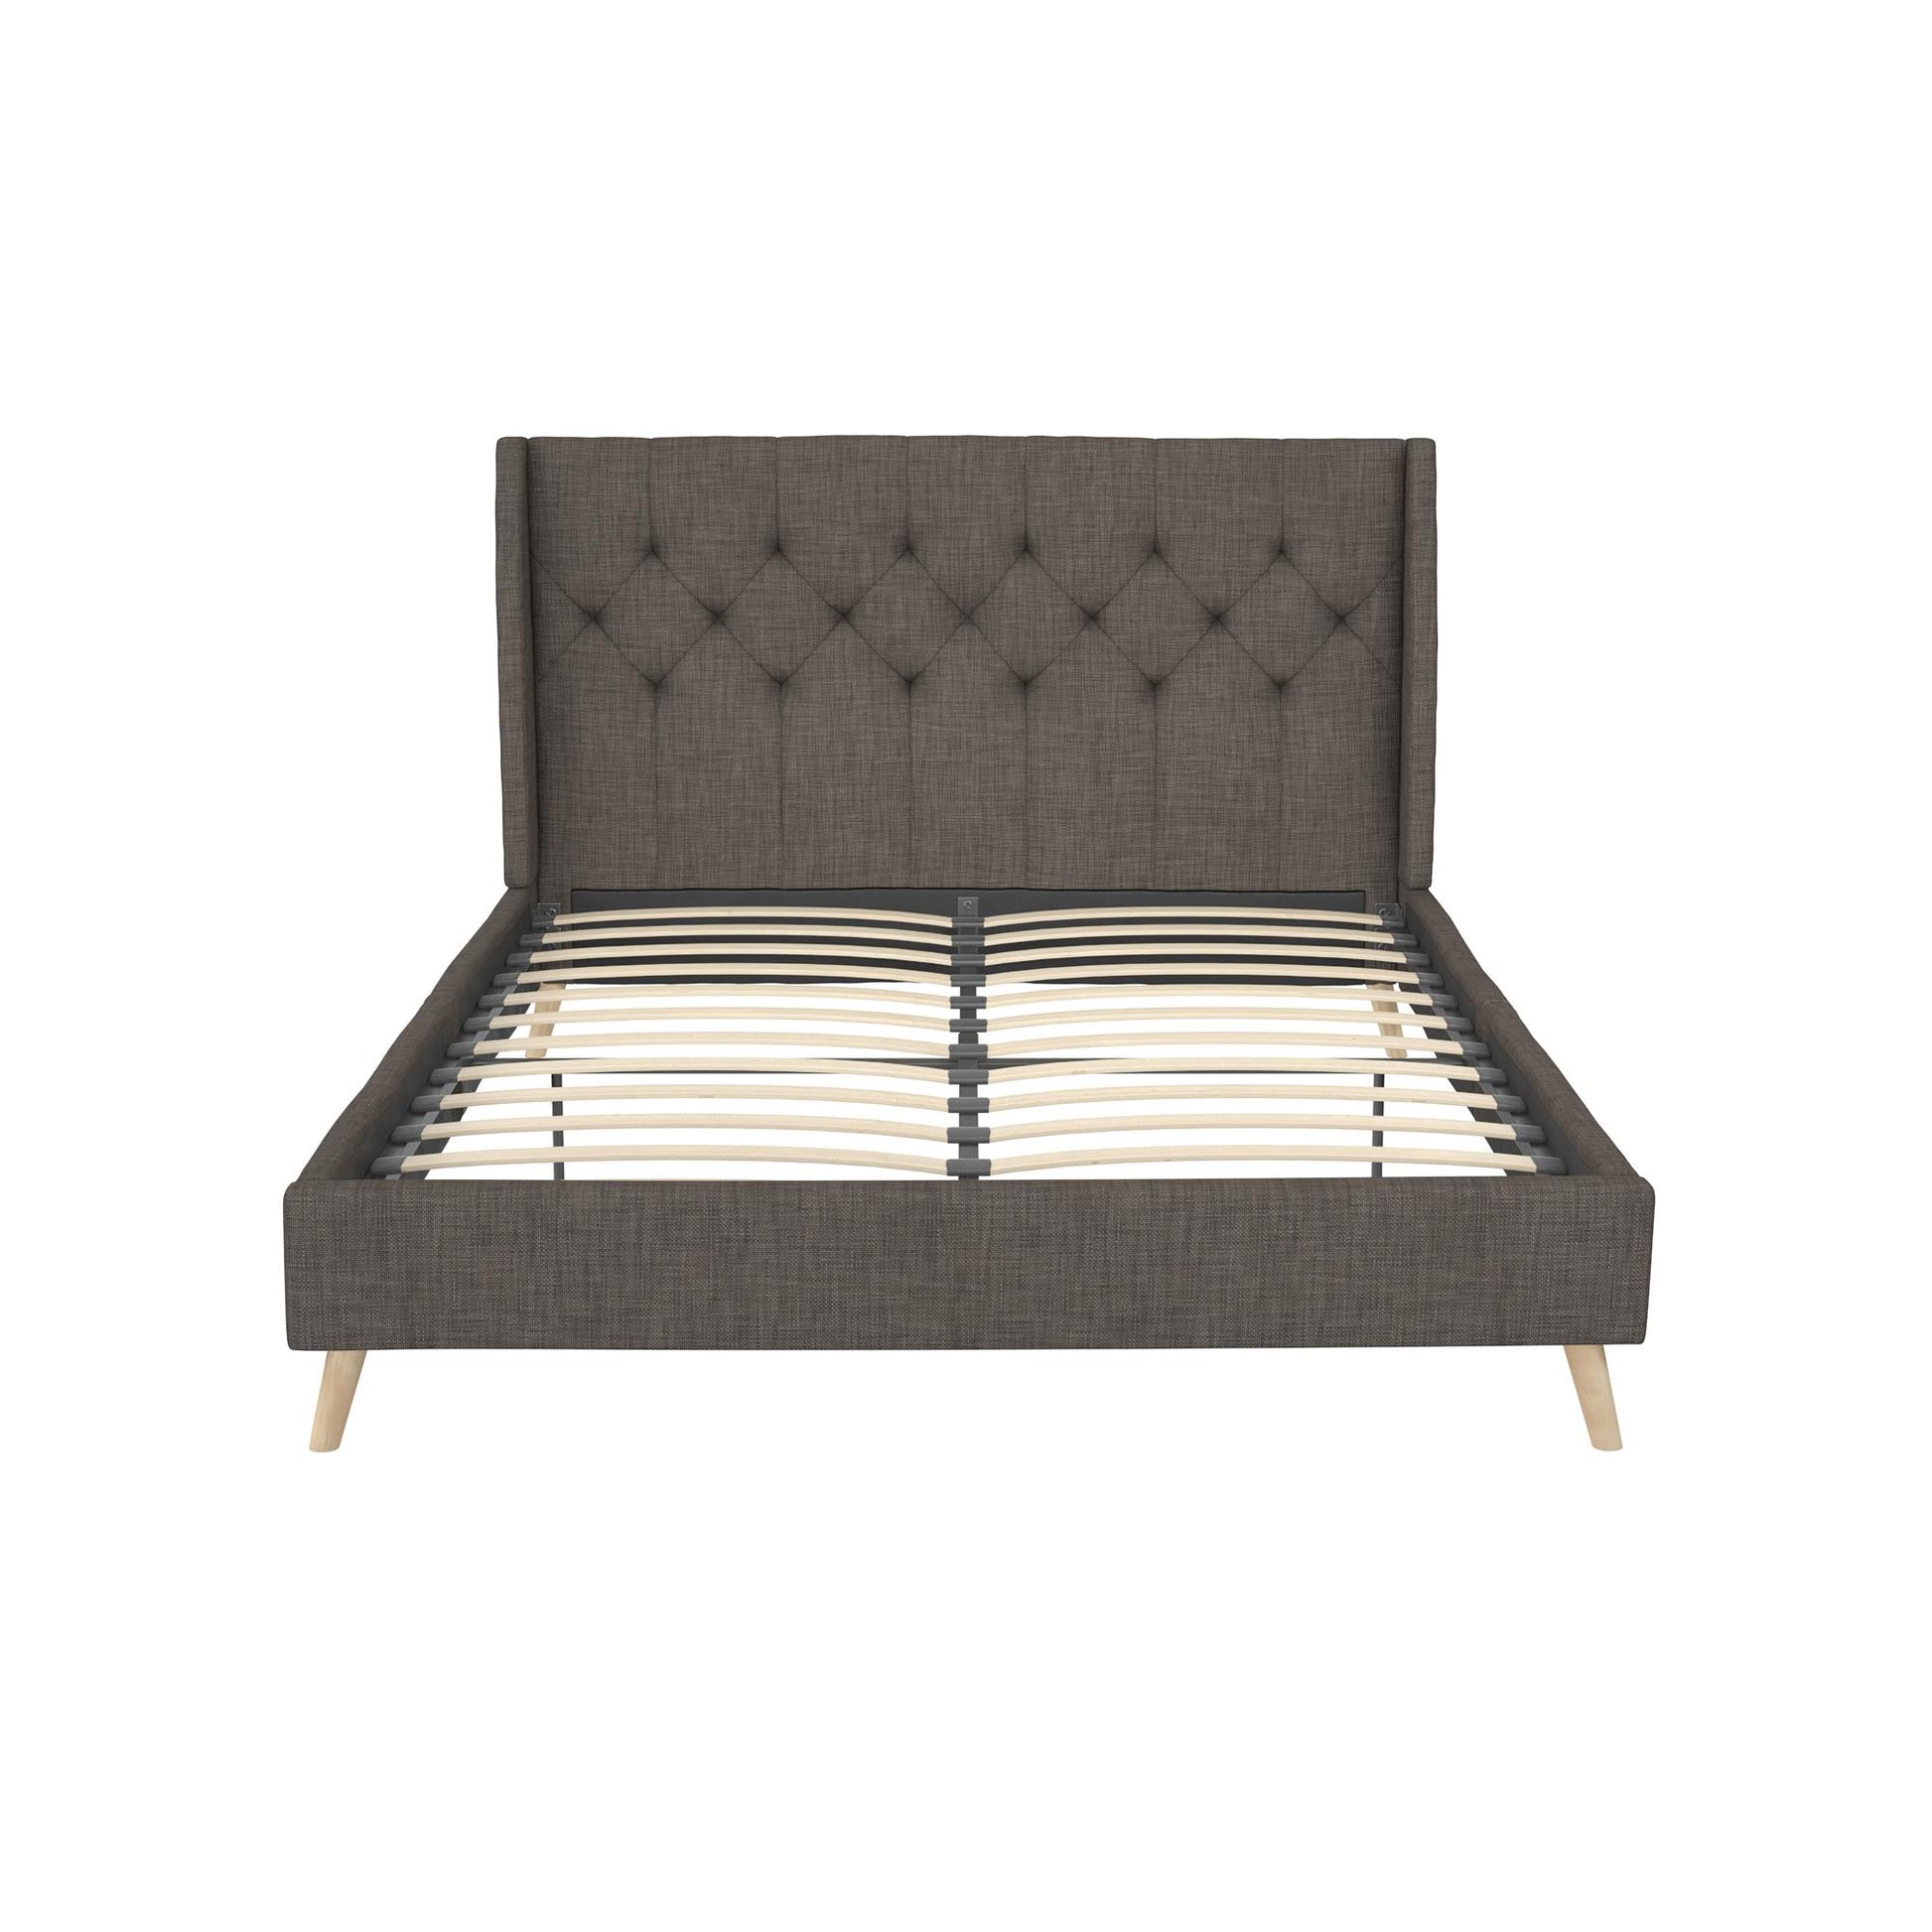 Her Majesty Bed - Grey Linen - Full